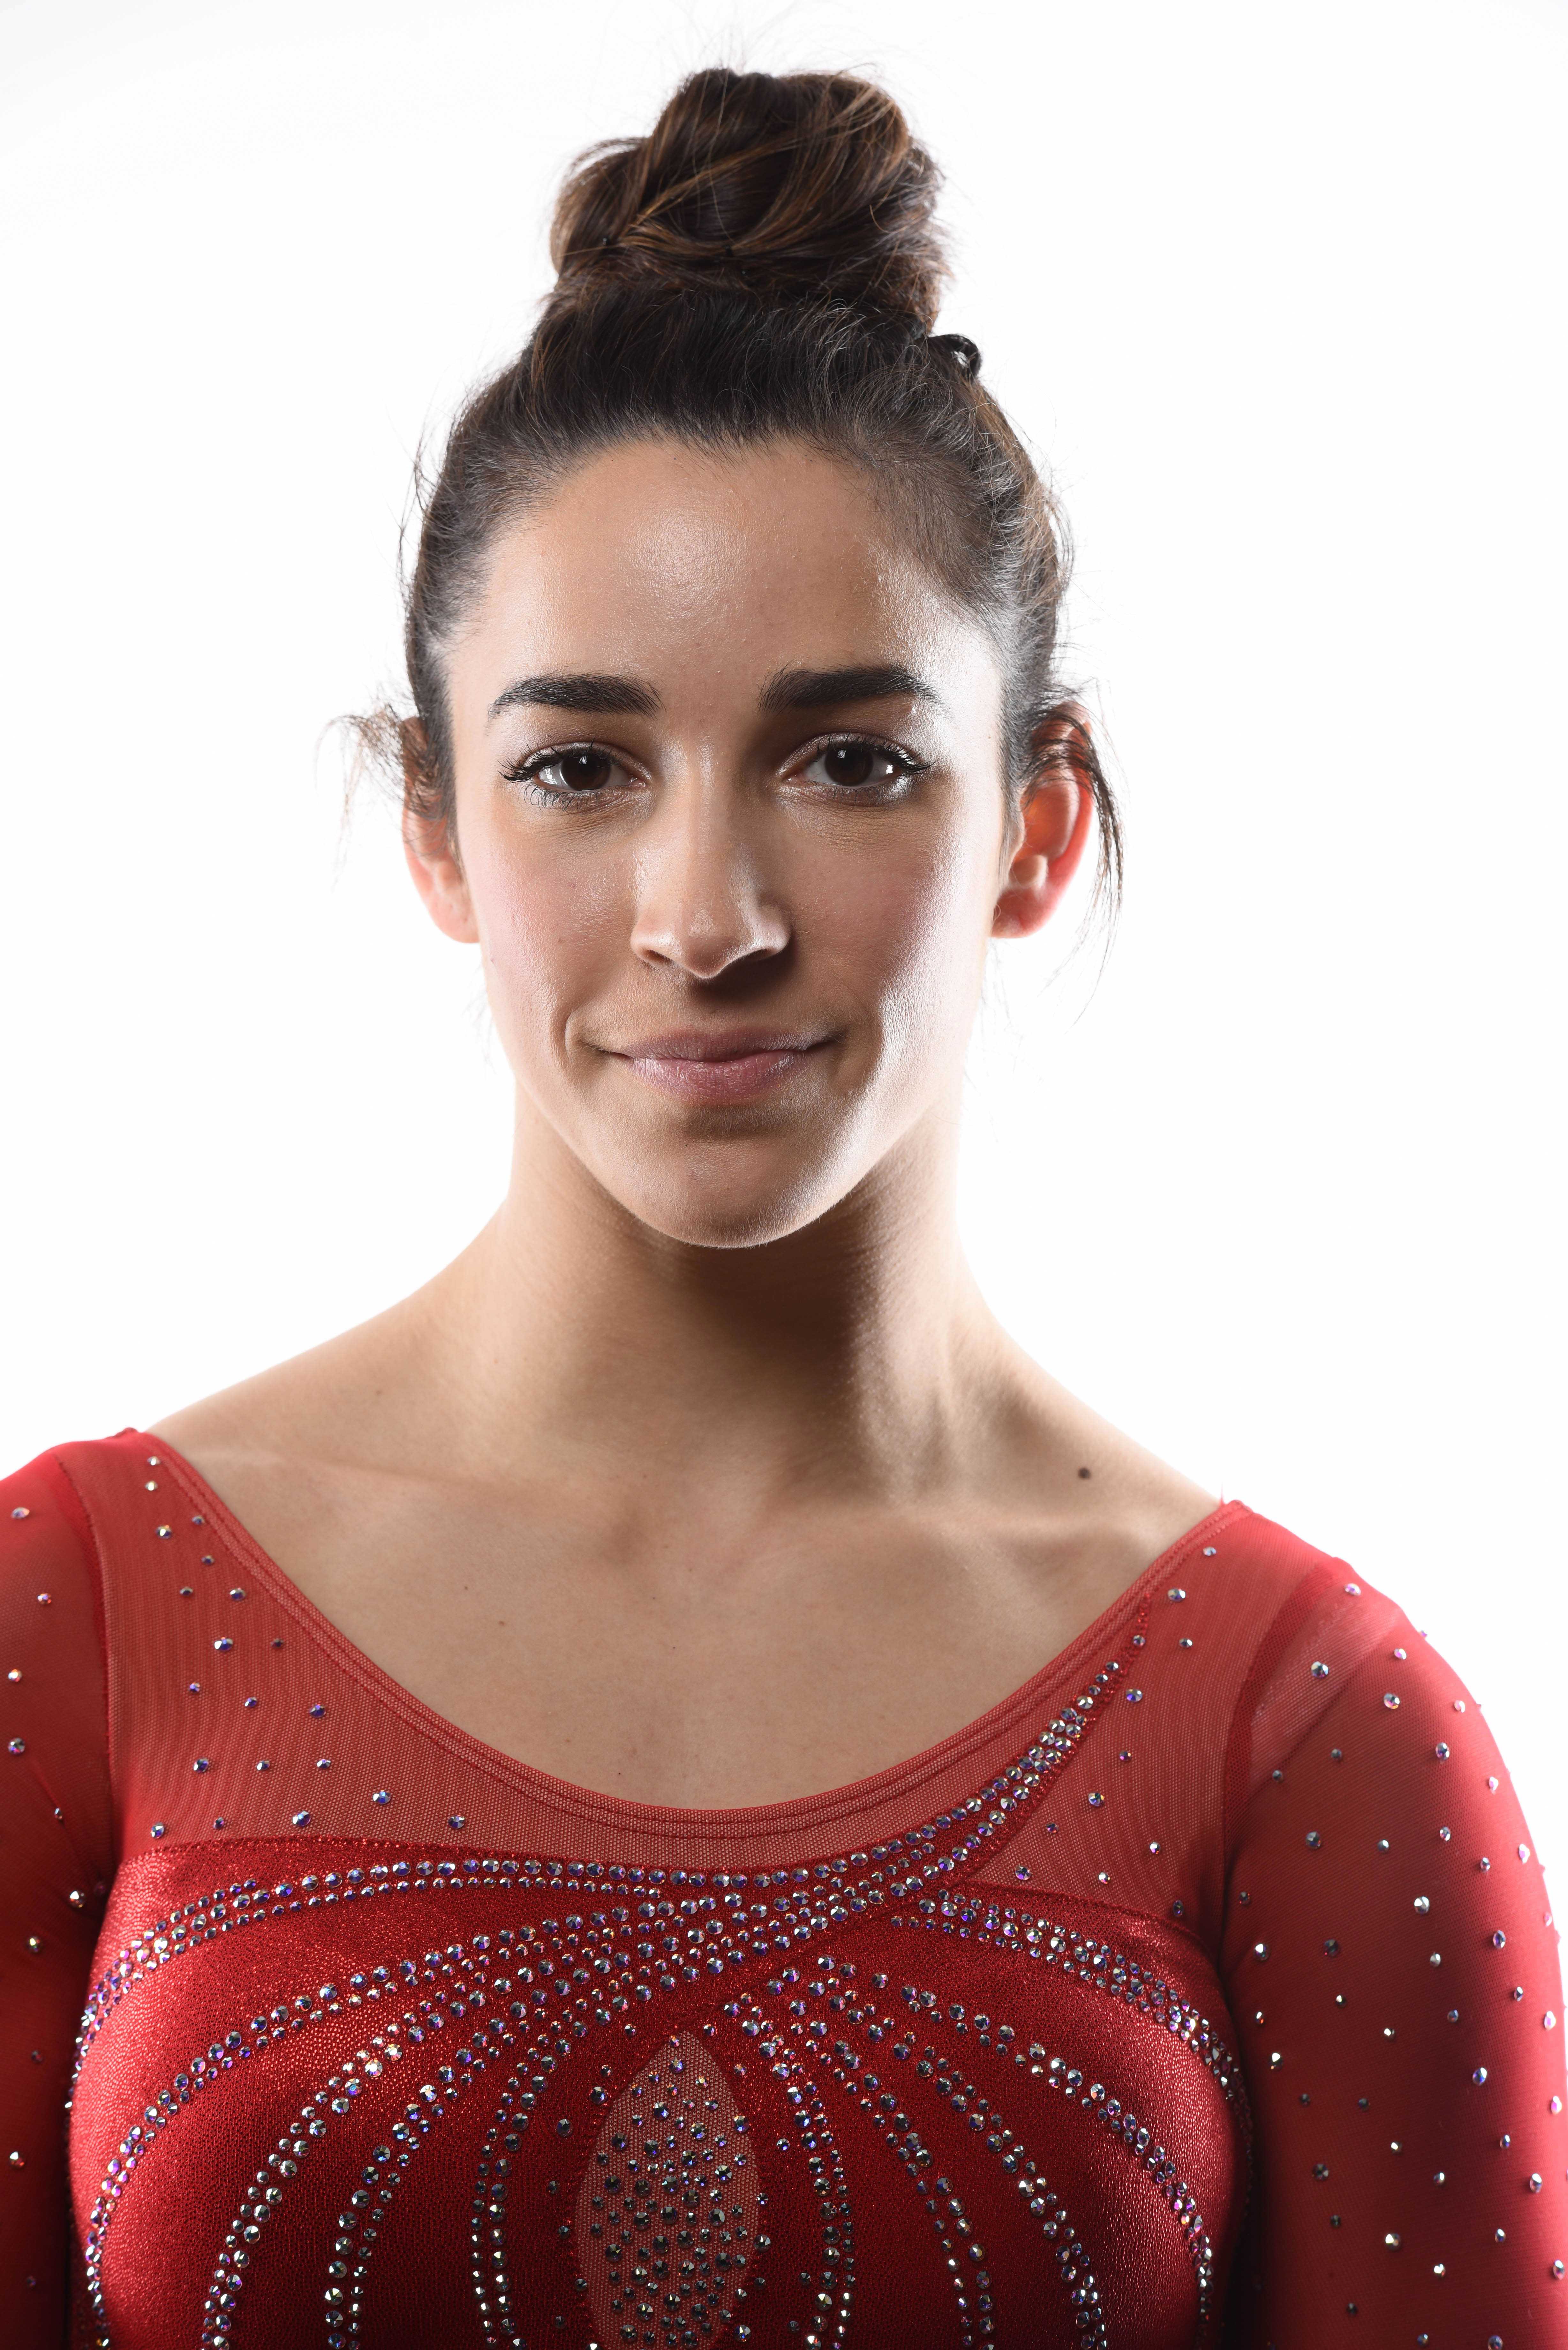 75+ Hot Pictures Of Aly Raisman Prove That She Is One Of The Hottest Women Alive | Best Of Comic Books